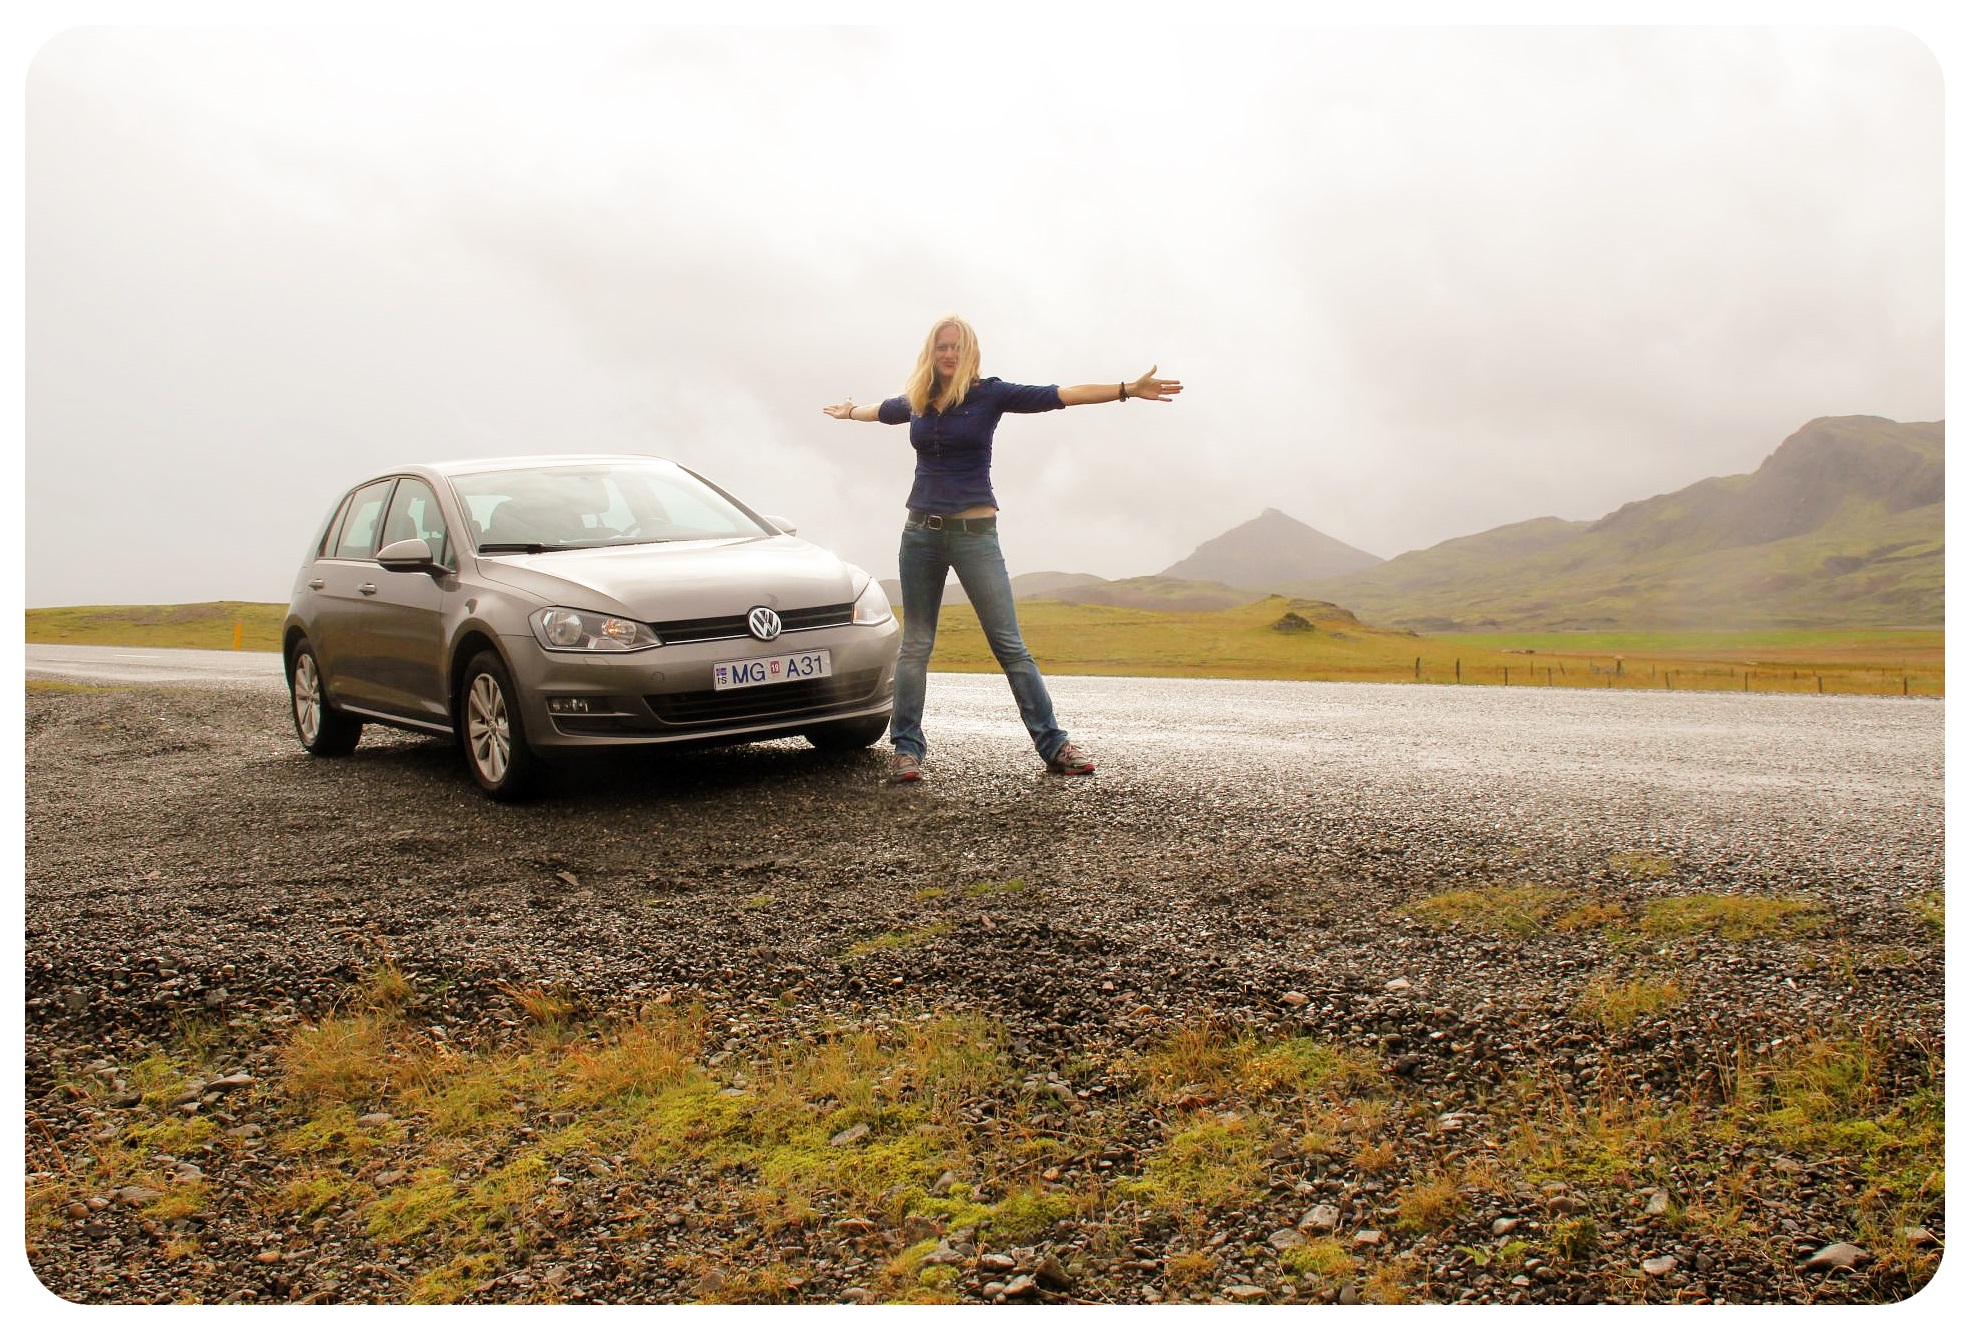 The Most Epic Iceland Road Trip, Part II (+ Tips for Driving in Iceland)